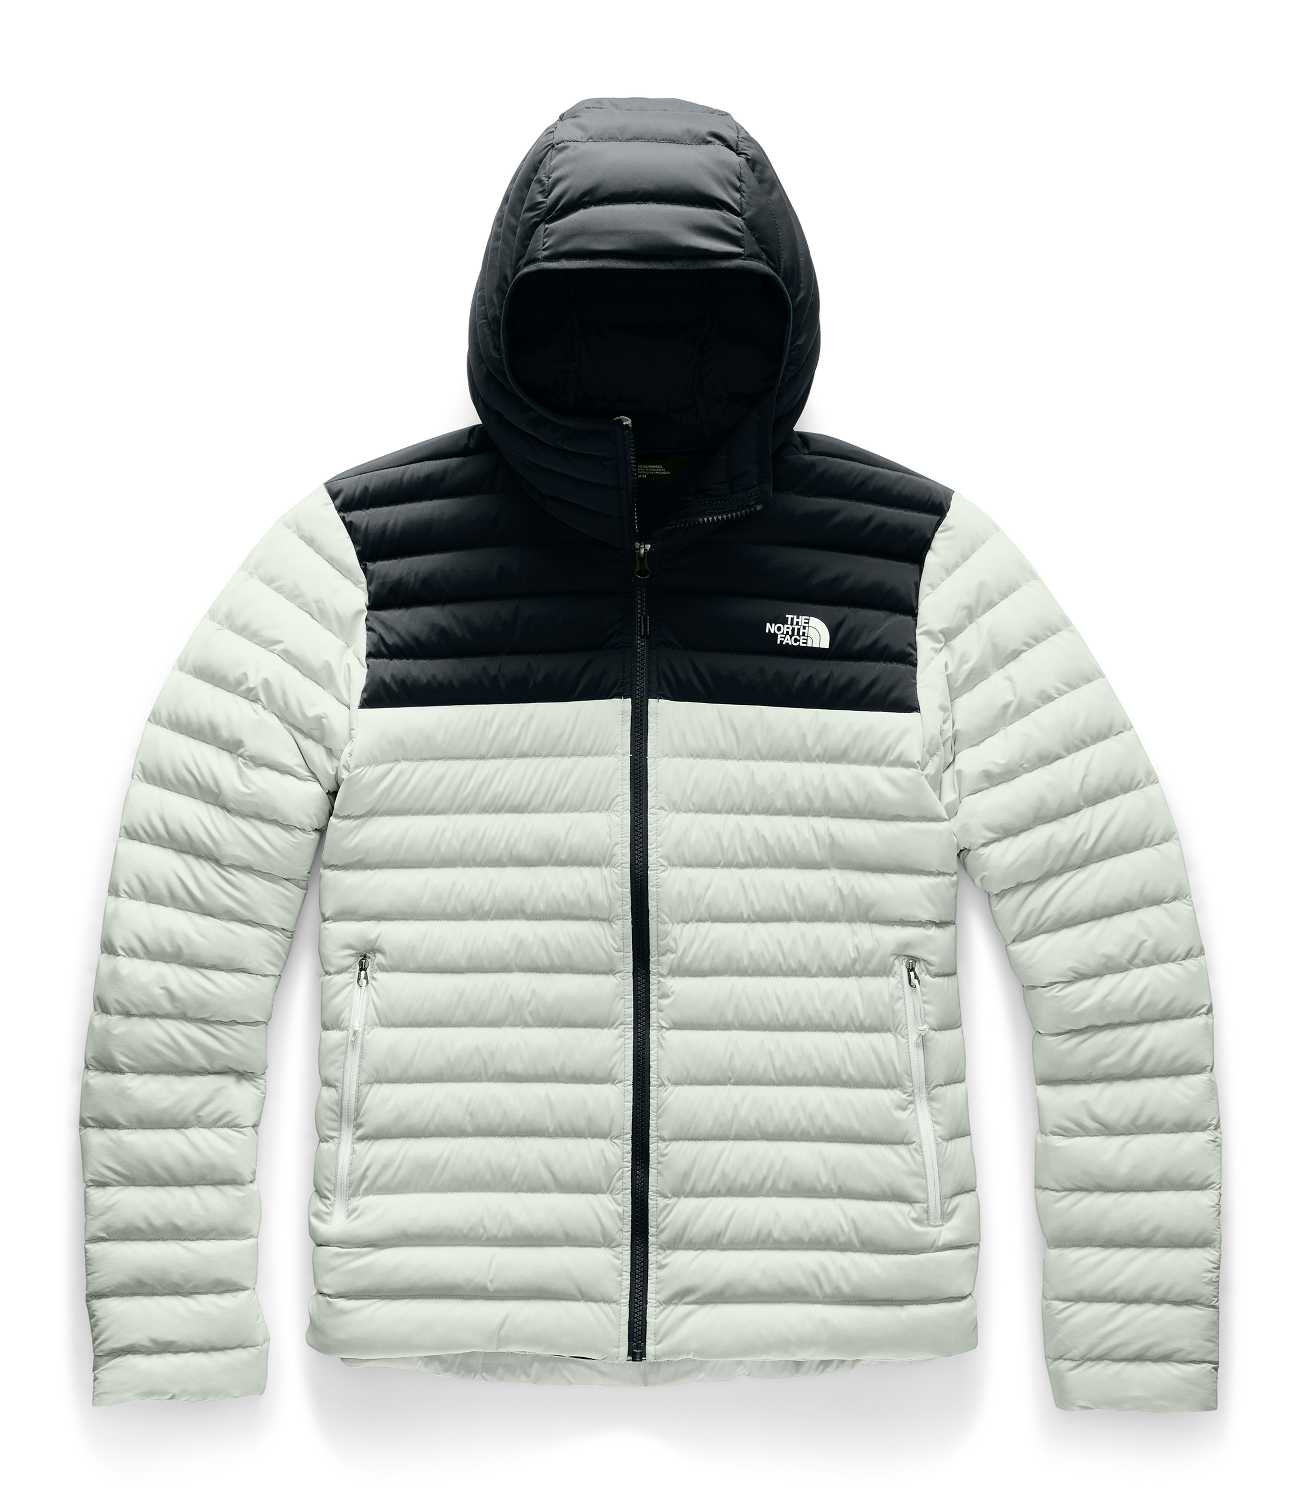 MEN'S STRETCH DOWN HOODIE | The North Face | The North Face Renewed